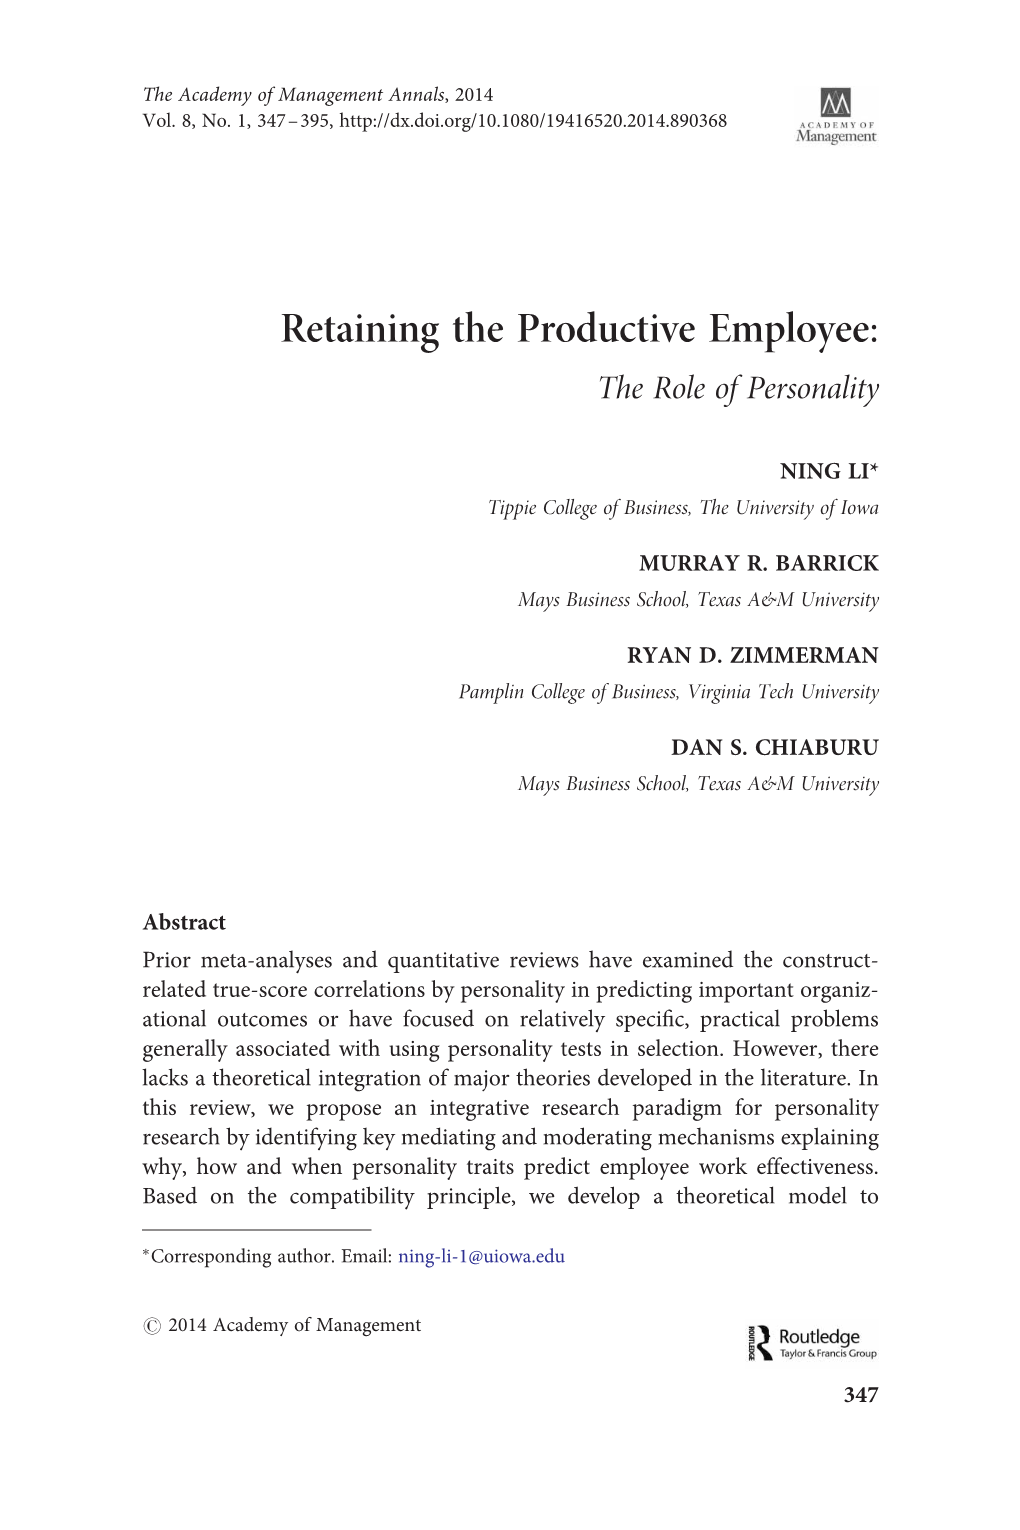 Retaining the Productive Employee: the Role of Personality